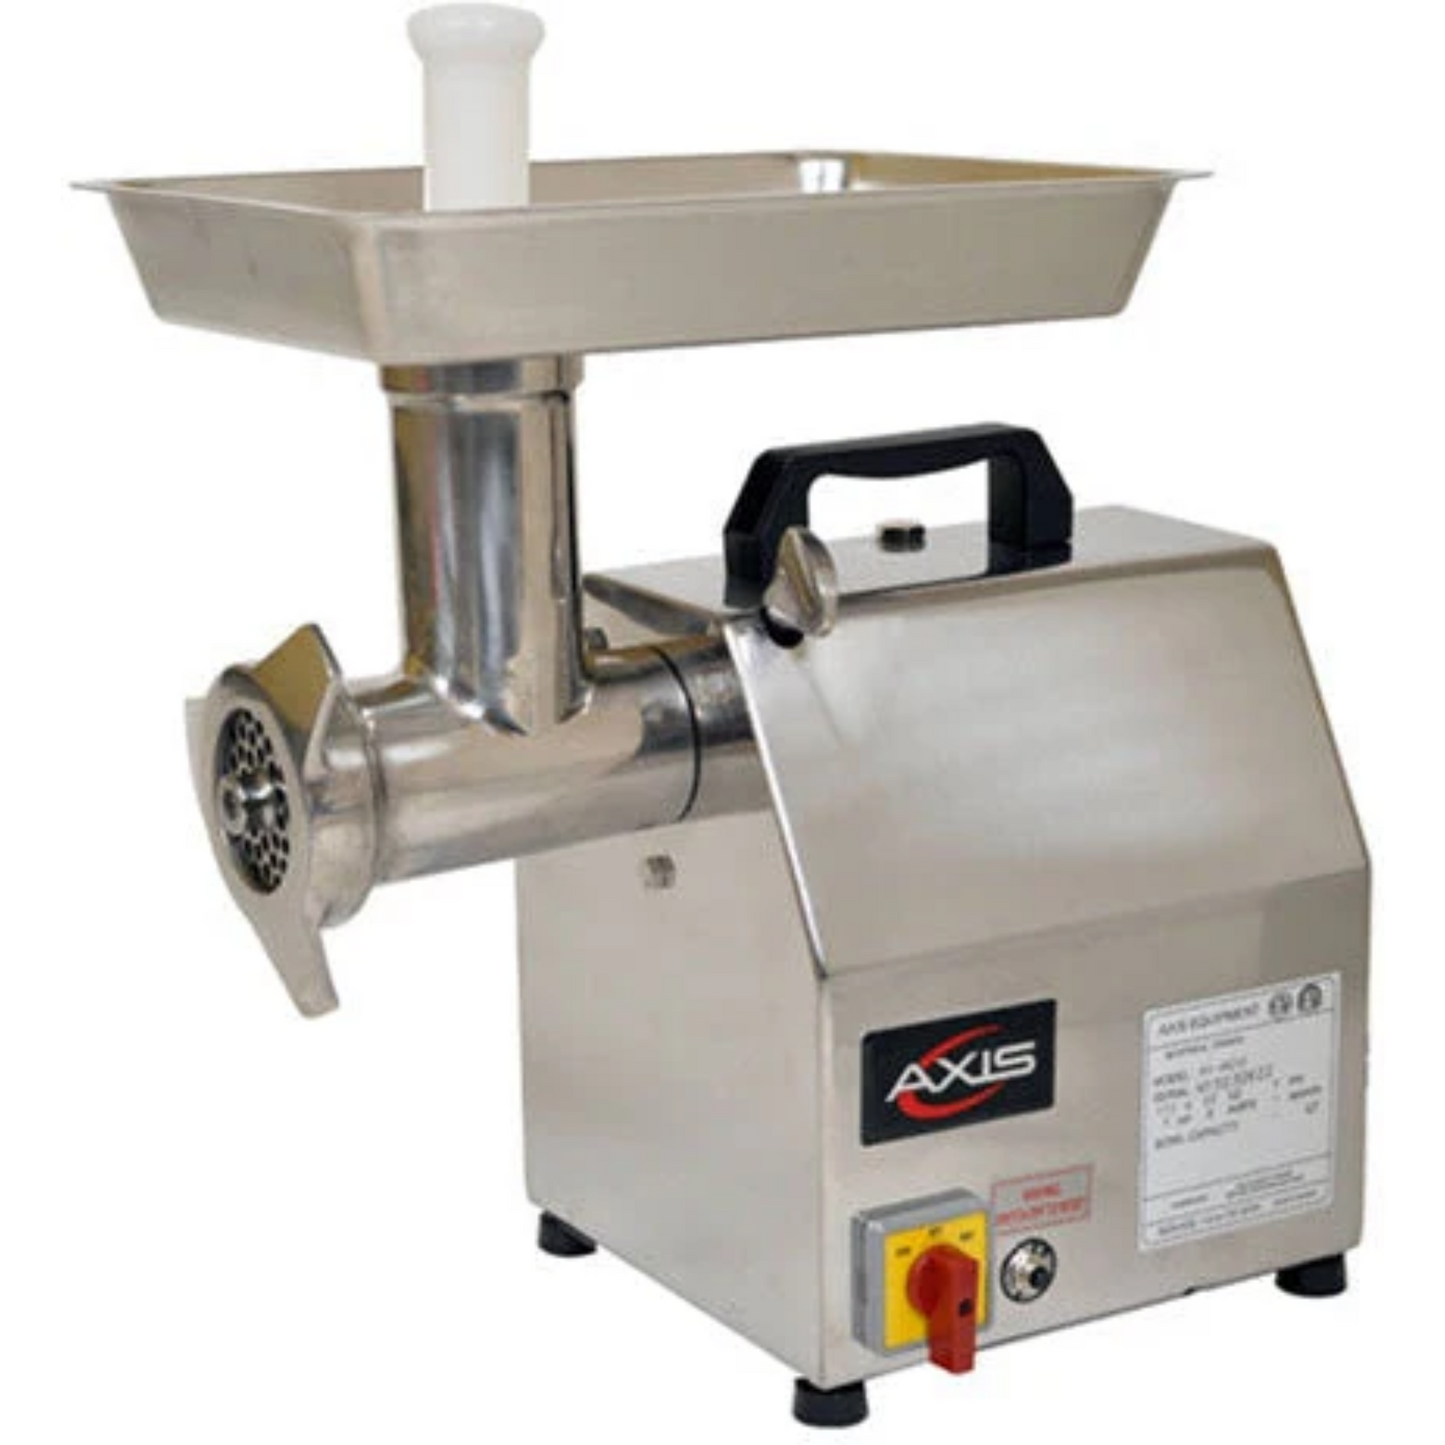 Axis AX-MG12 Electric Meat Grinder 1 HP